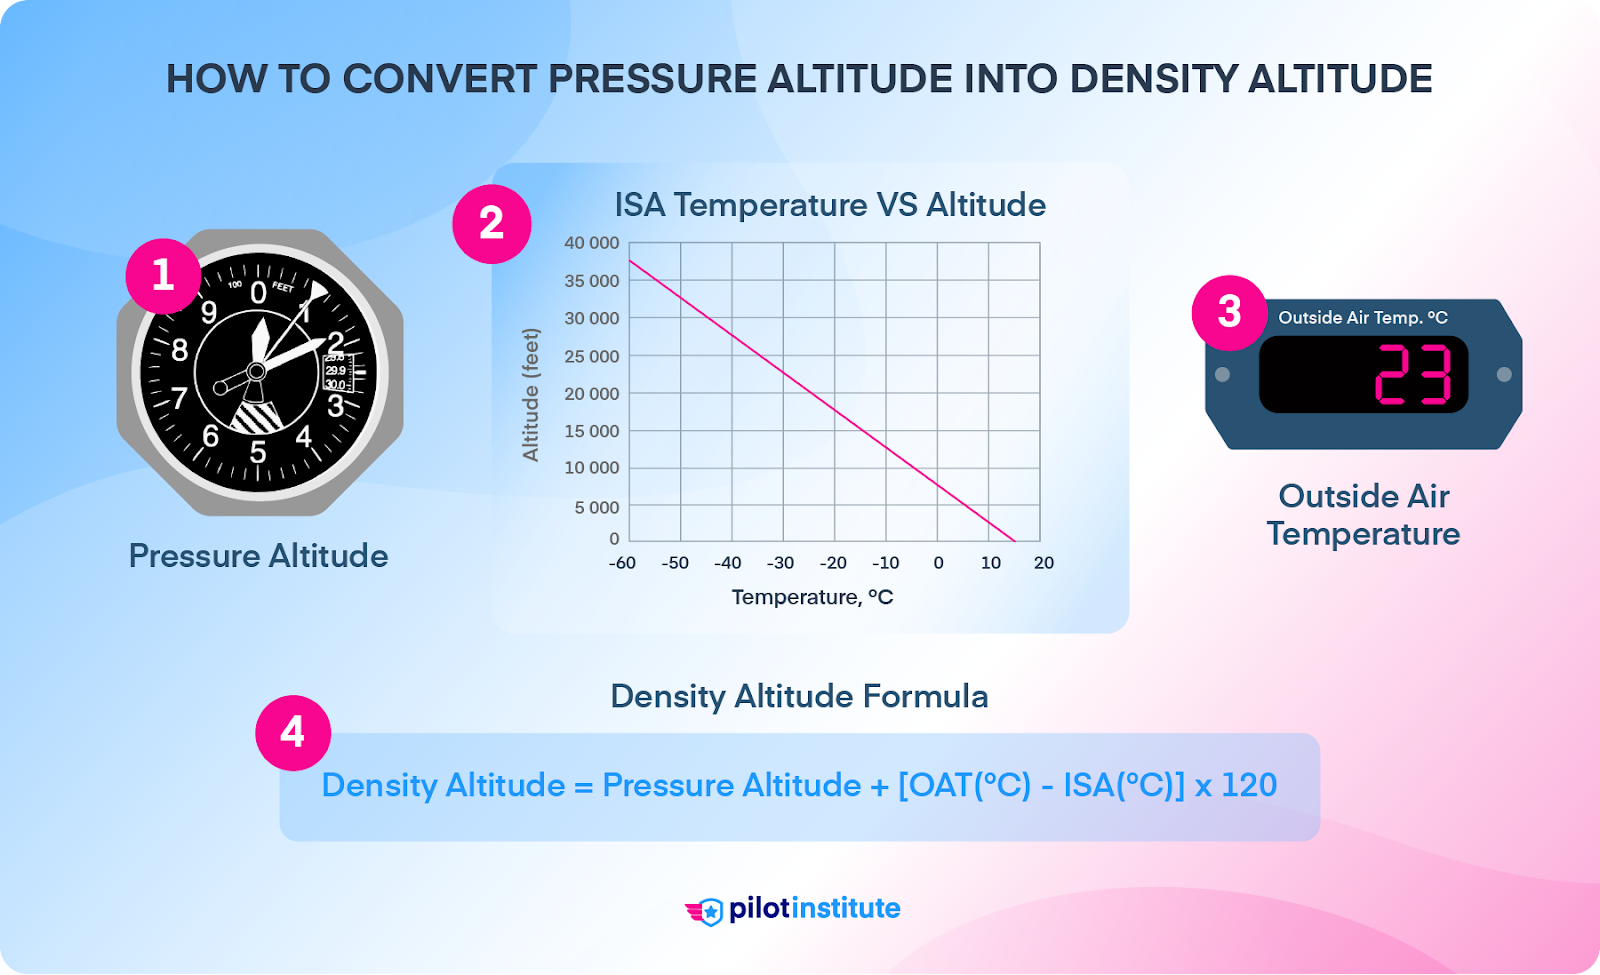 Infographic showing the four steps for converting pressure altitude to density altitude.